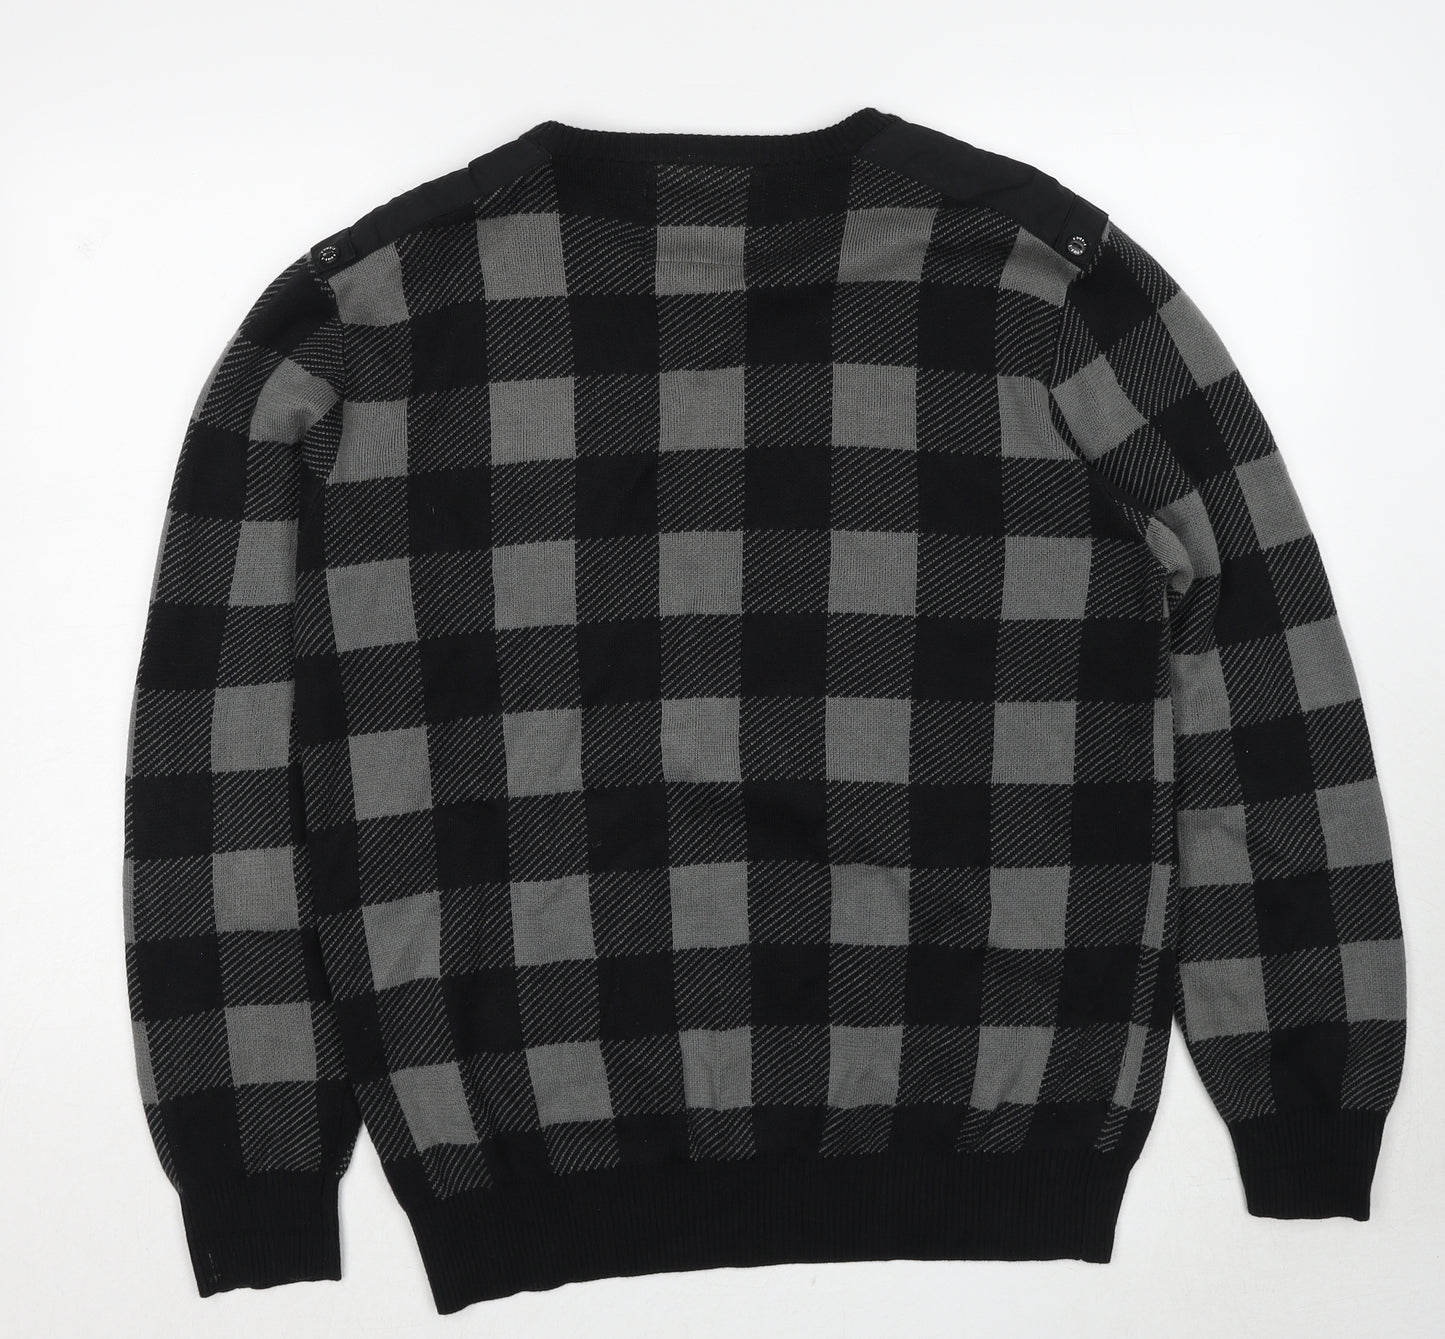 NEXT Mens Black Round Neck Check Cotton Pullover Jumper Size L Long Sleeve